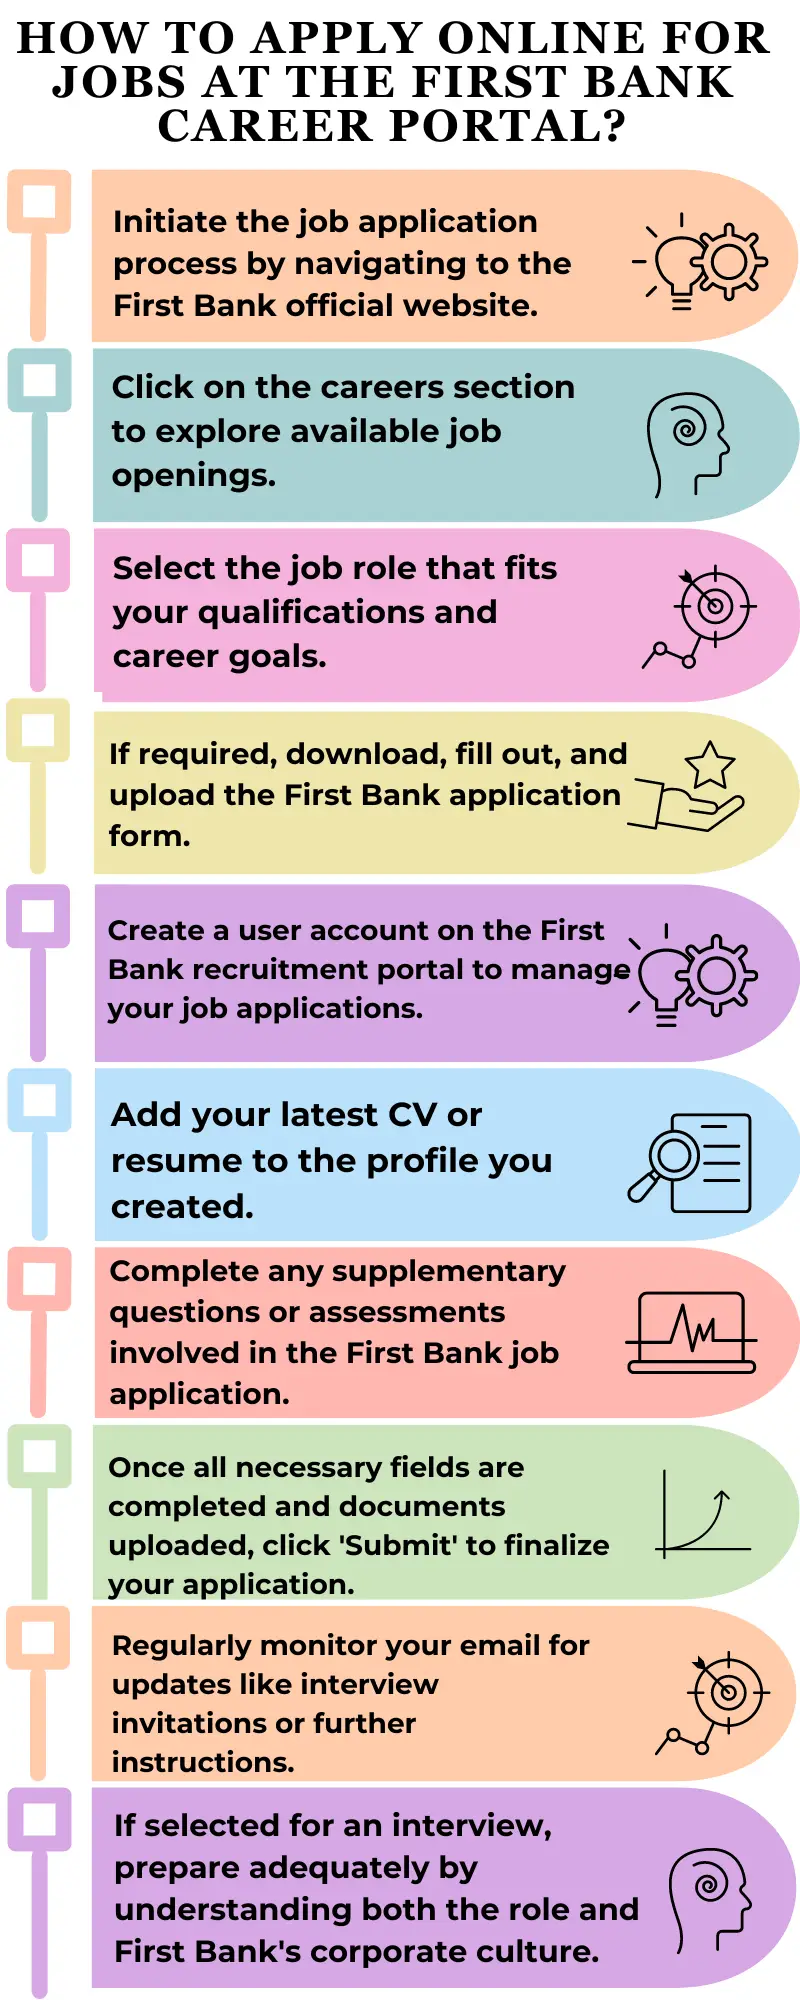 How to Apply Online for Jobs at the First Bank Career Portal?